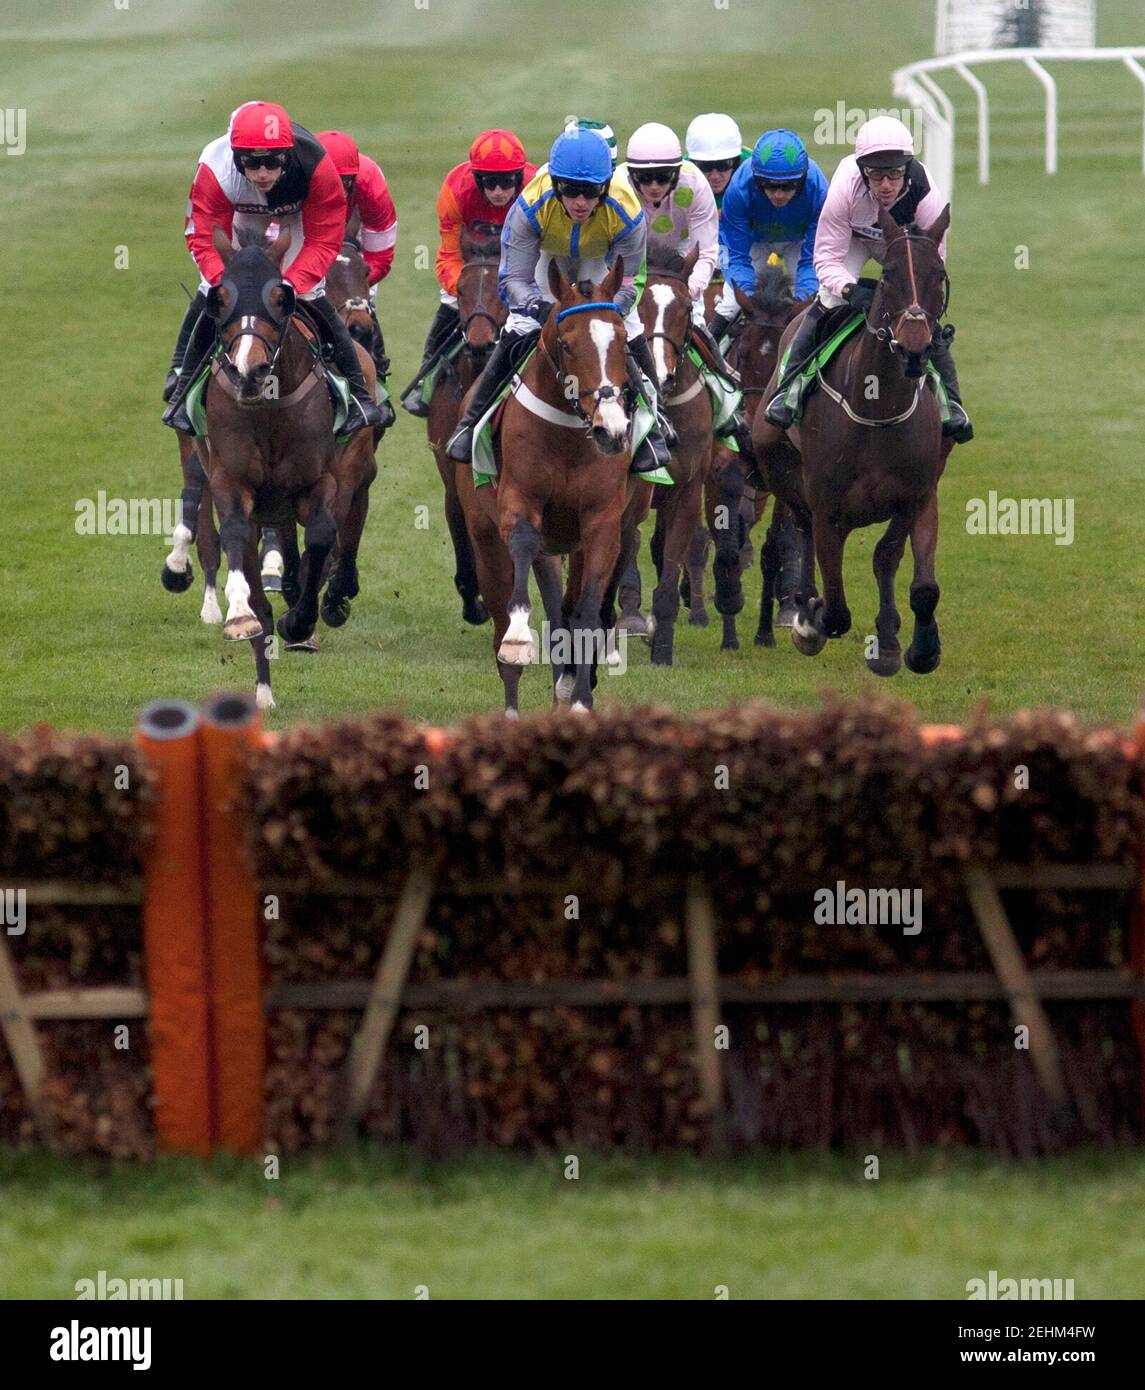 Horse Racing - Cheltenham Festival  - Cheltenham Racecourse - 13/3/12  General view of runners during the 15.20 Stan James Champion Hurdle Challenge Trophy Race  Mandatory Credit: Action Images / Julian Herbert  Livepic Stock Photo